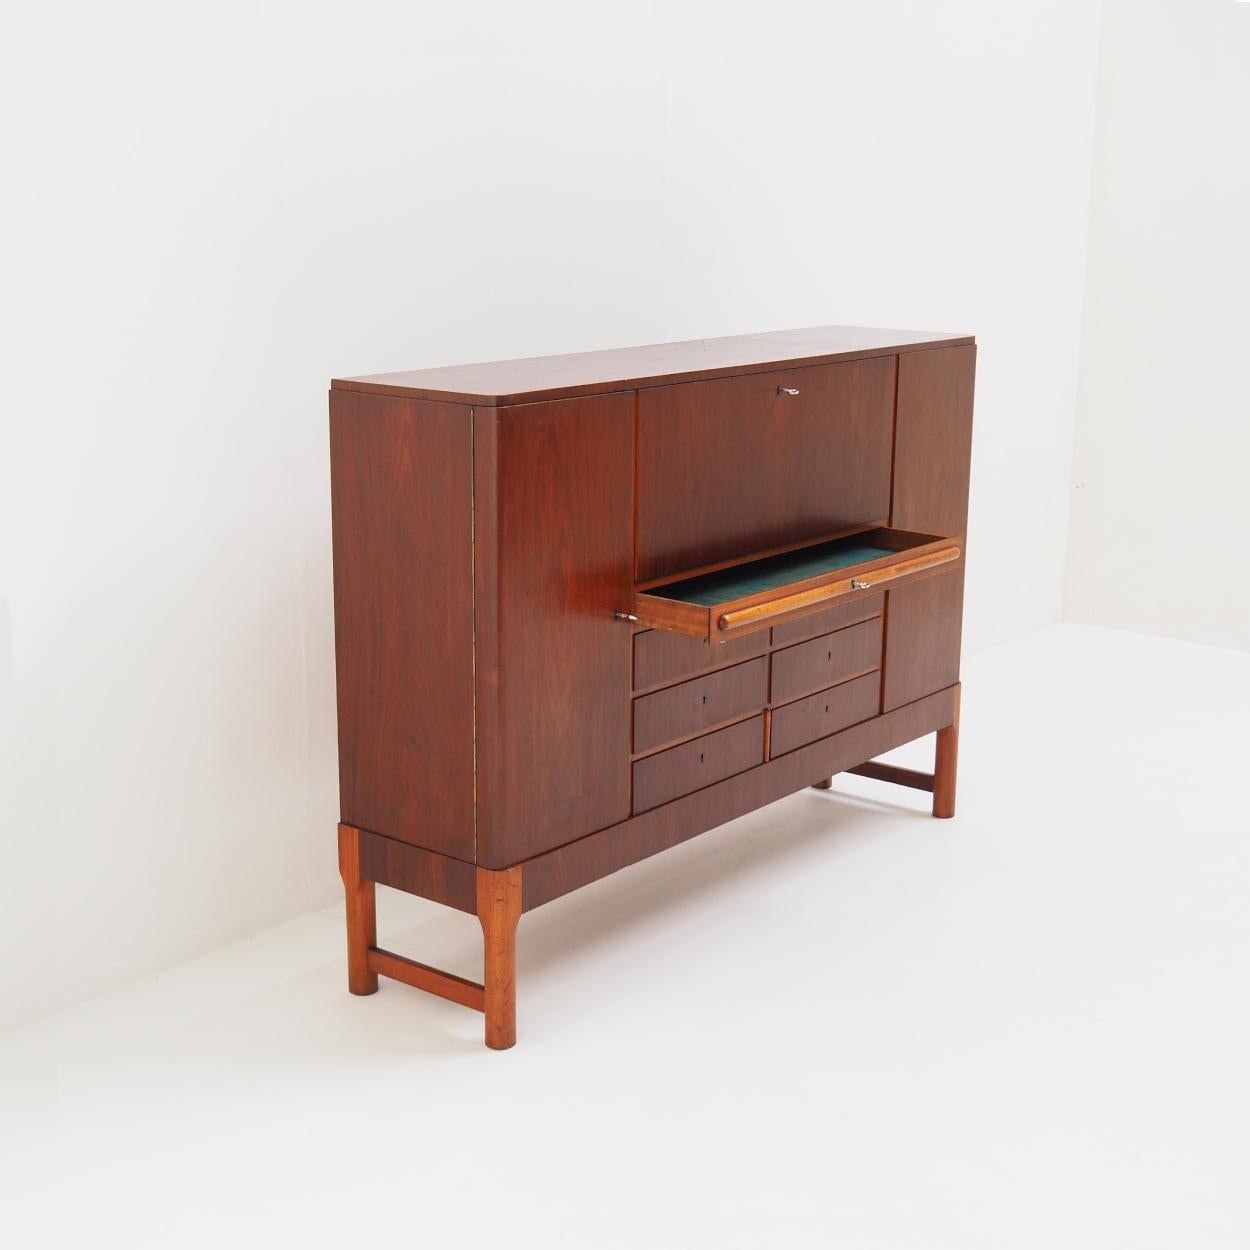 Mid-20th Century Scandinavian High Quality Cabinet from the 1960s For Sale